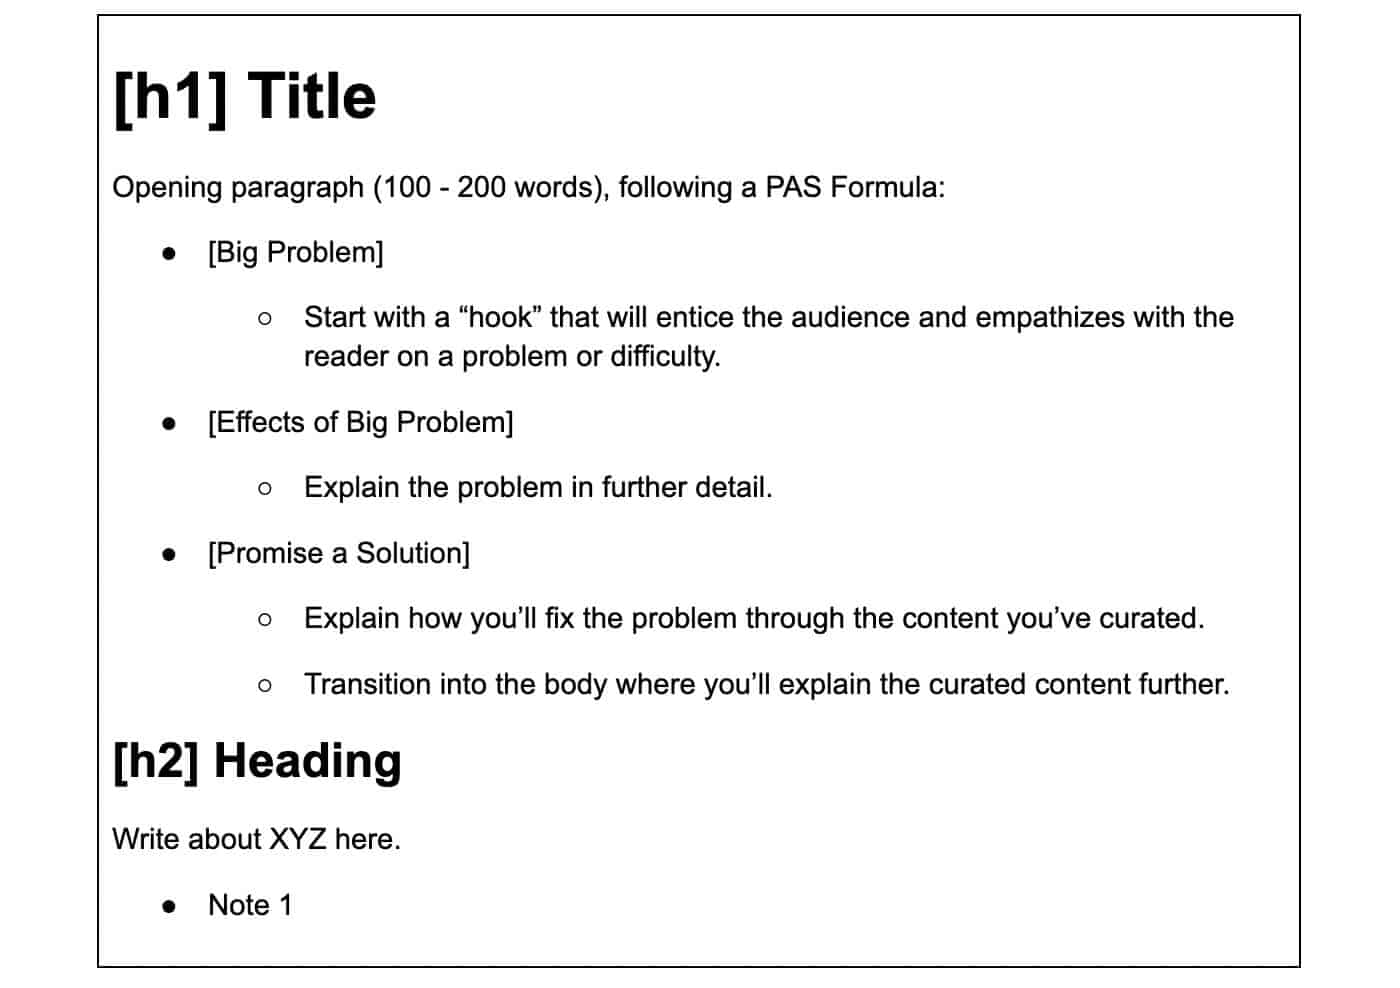 Content Outline Section